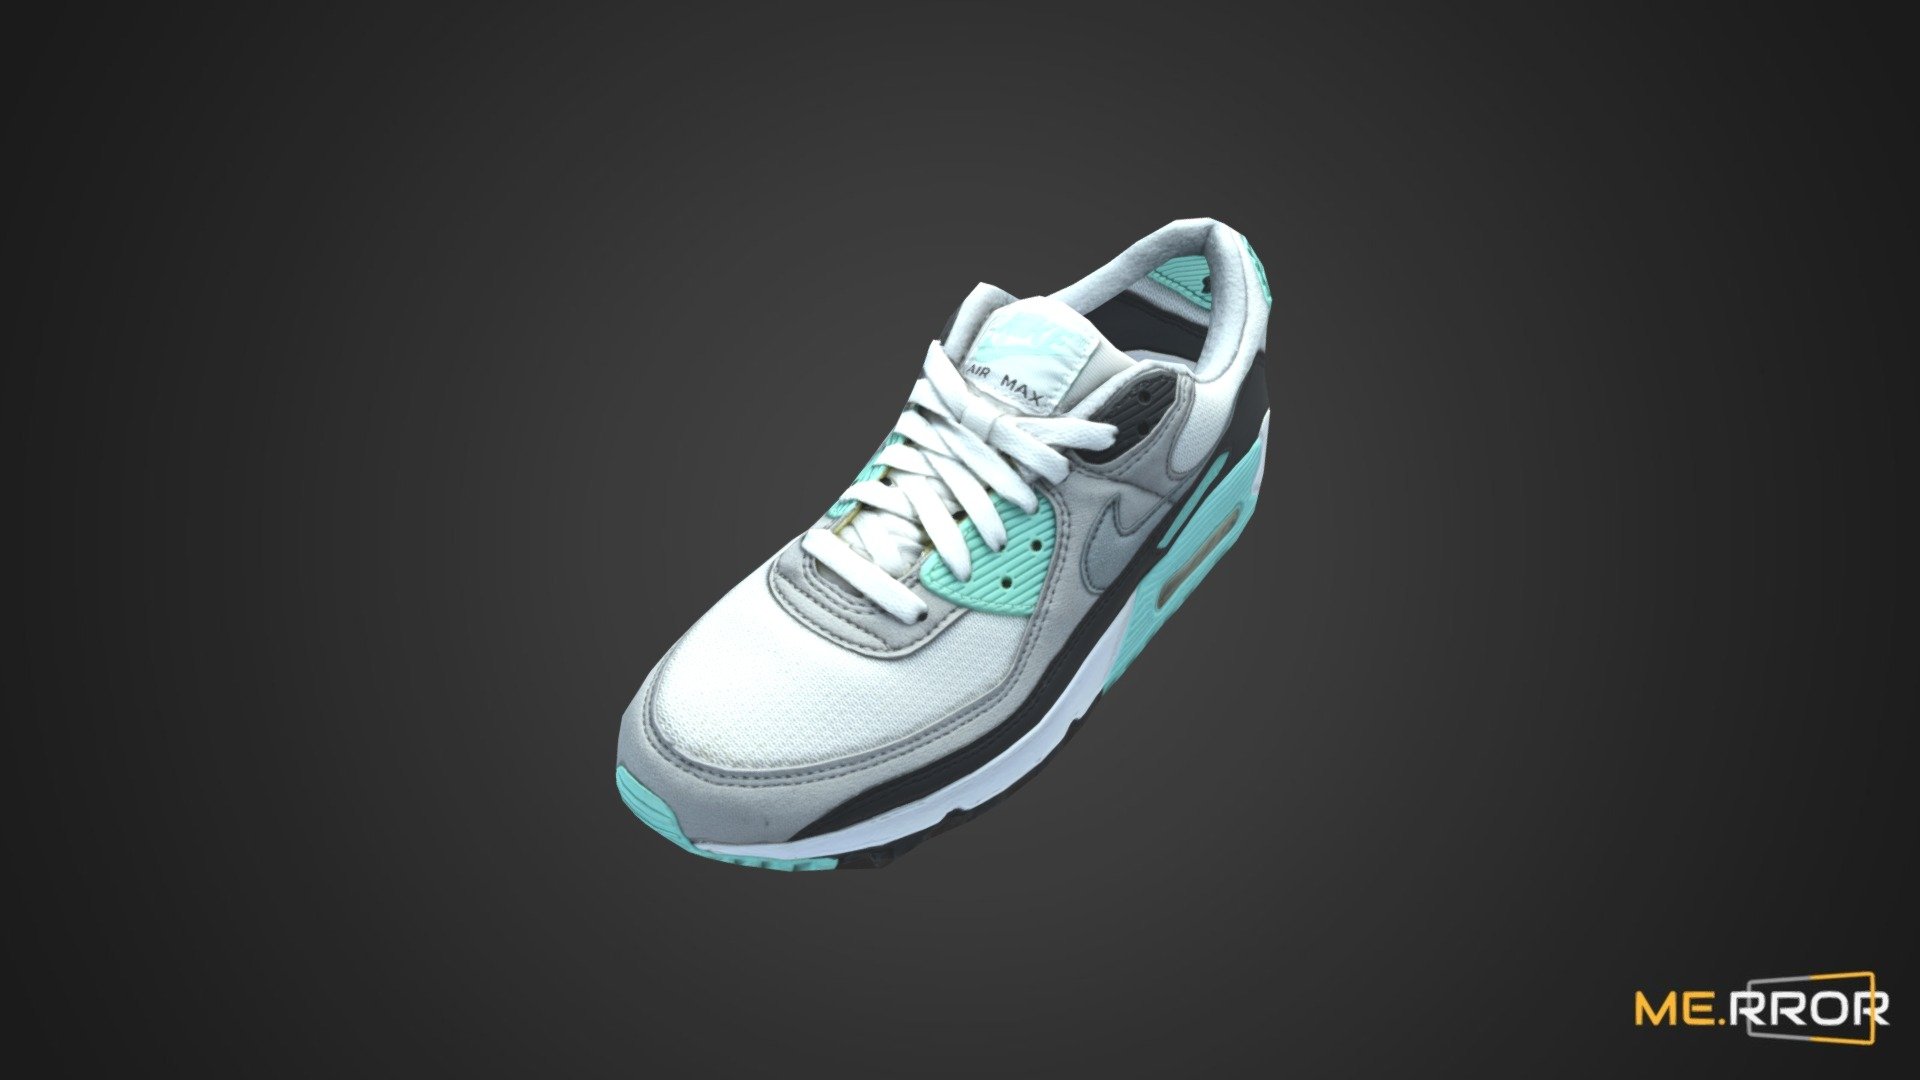 MERROR is a 3D Content PLATFORM which introduces various Asian assets to the 3D world


3DScanning #Photogrametry #ME.RROR - [Game-Ready] Running Shoes - Buy Royalty Free 3D model by ME.RROR (@merror) 3d model